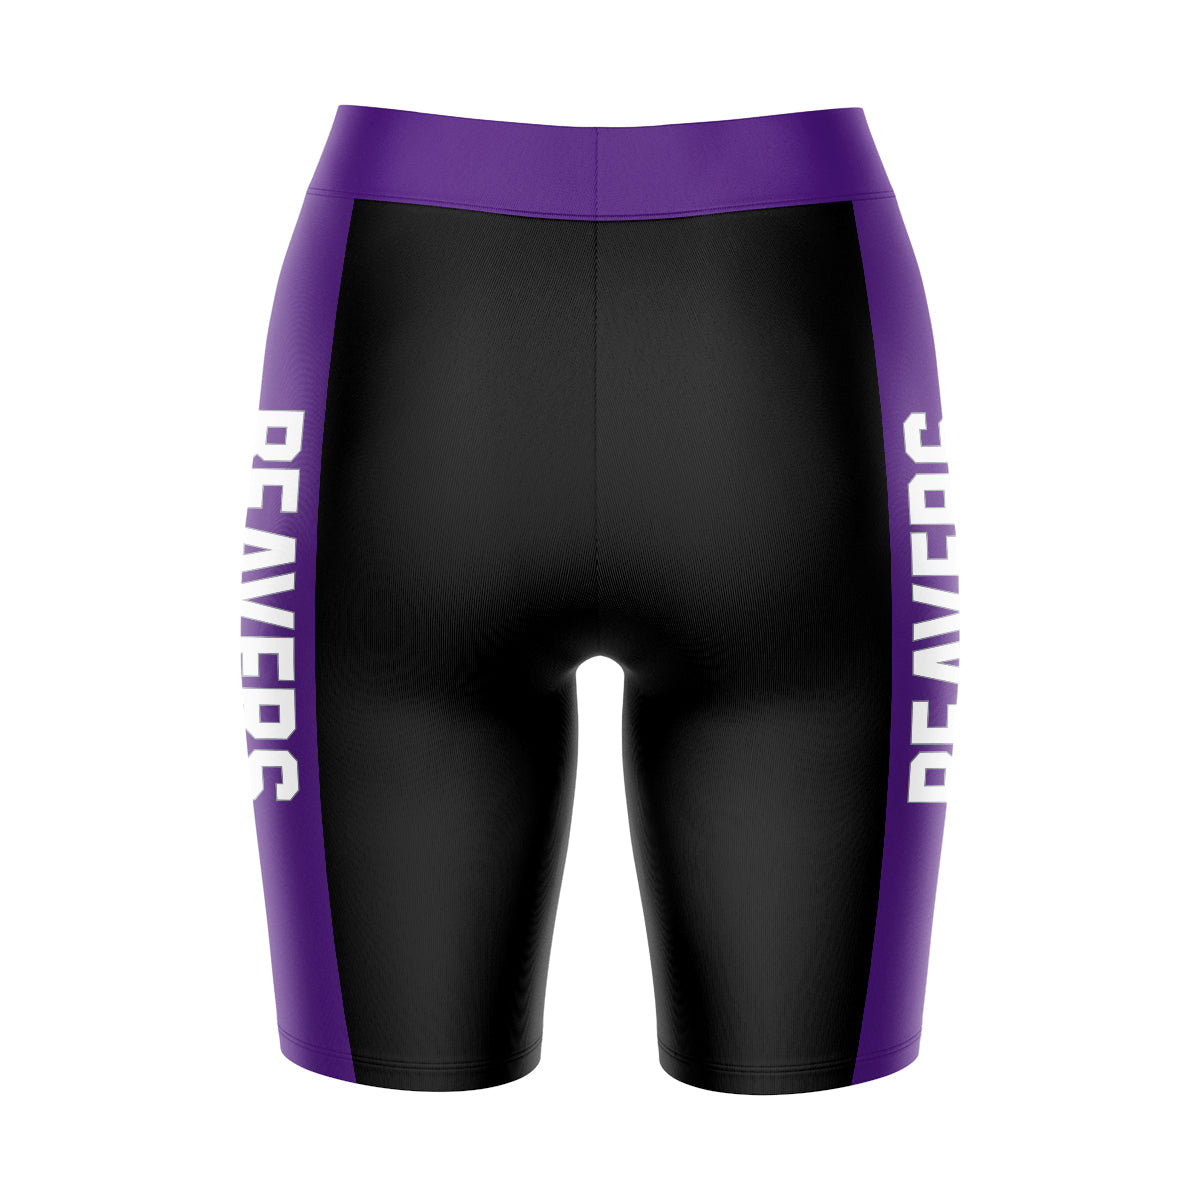 City College of New York CCNY Vive La Fete Game Day Logo on Waistband and Purple Stripes Black Women Bike Short 9 Inseam